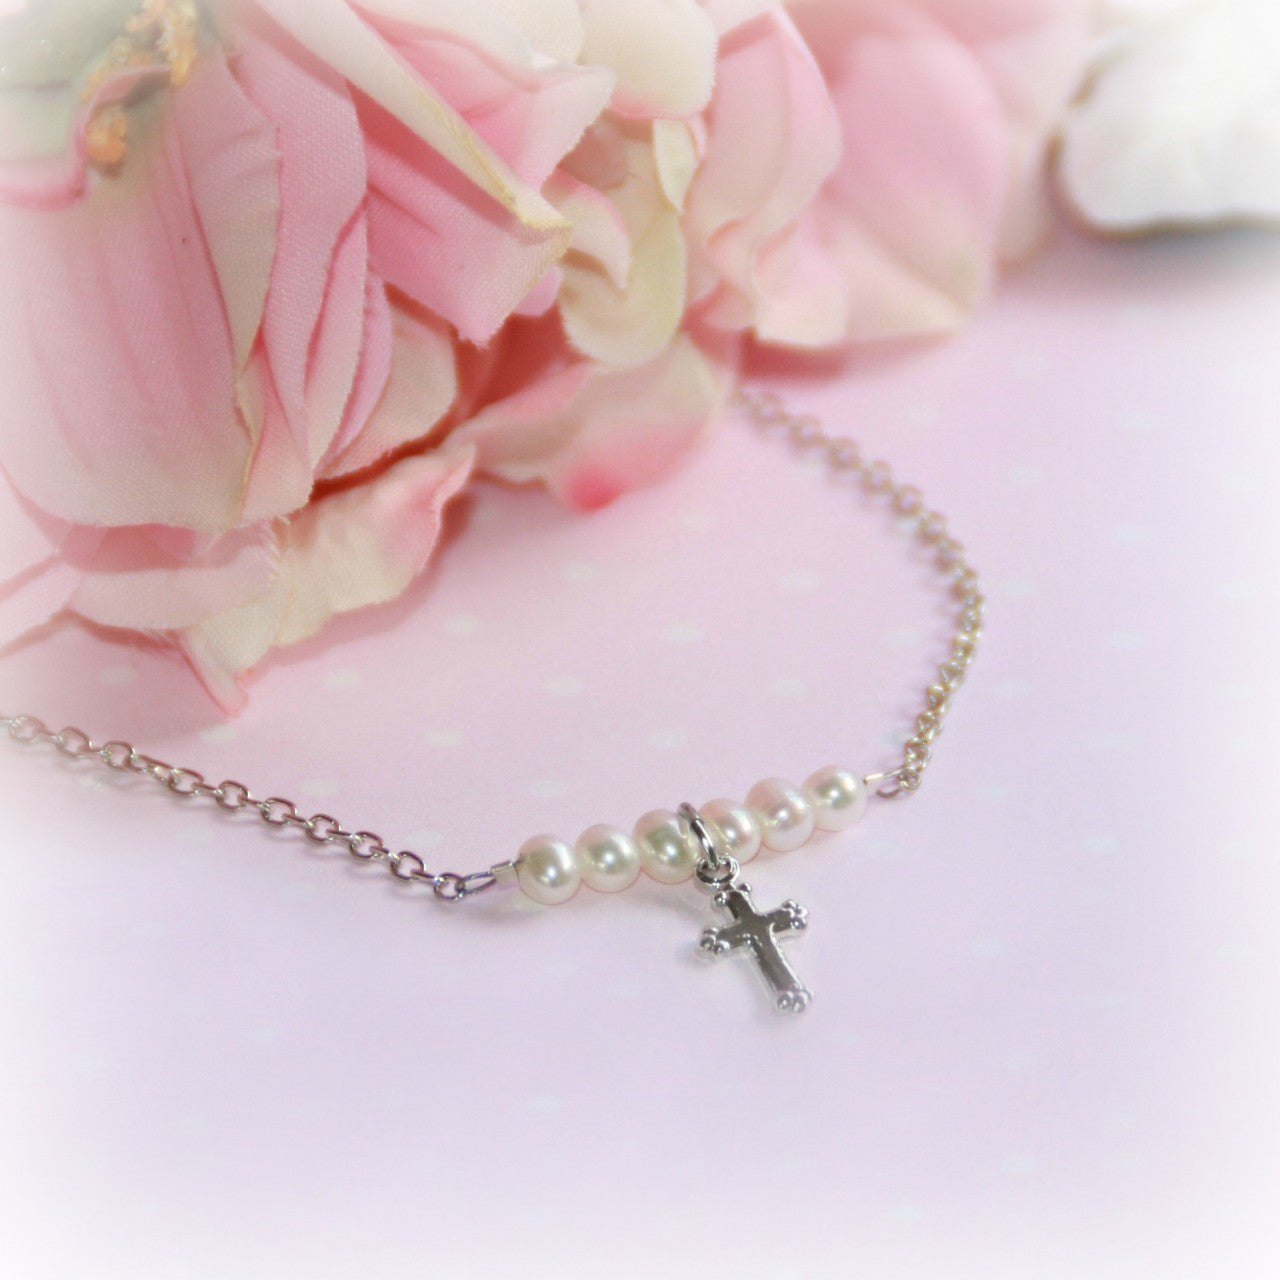 Rhodium Cross with Freshwater Pearls Necklace